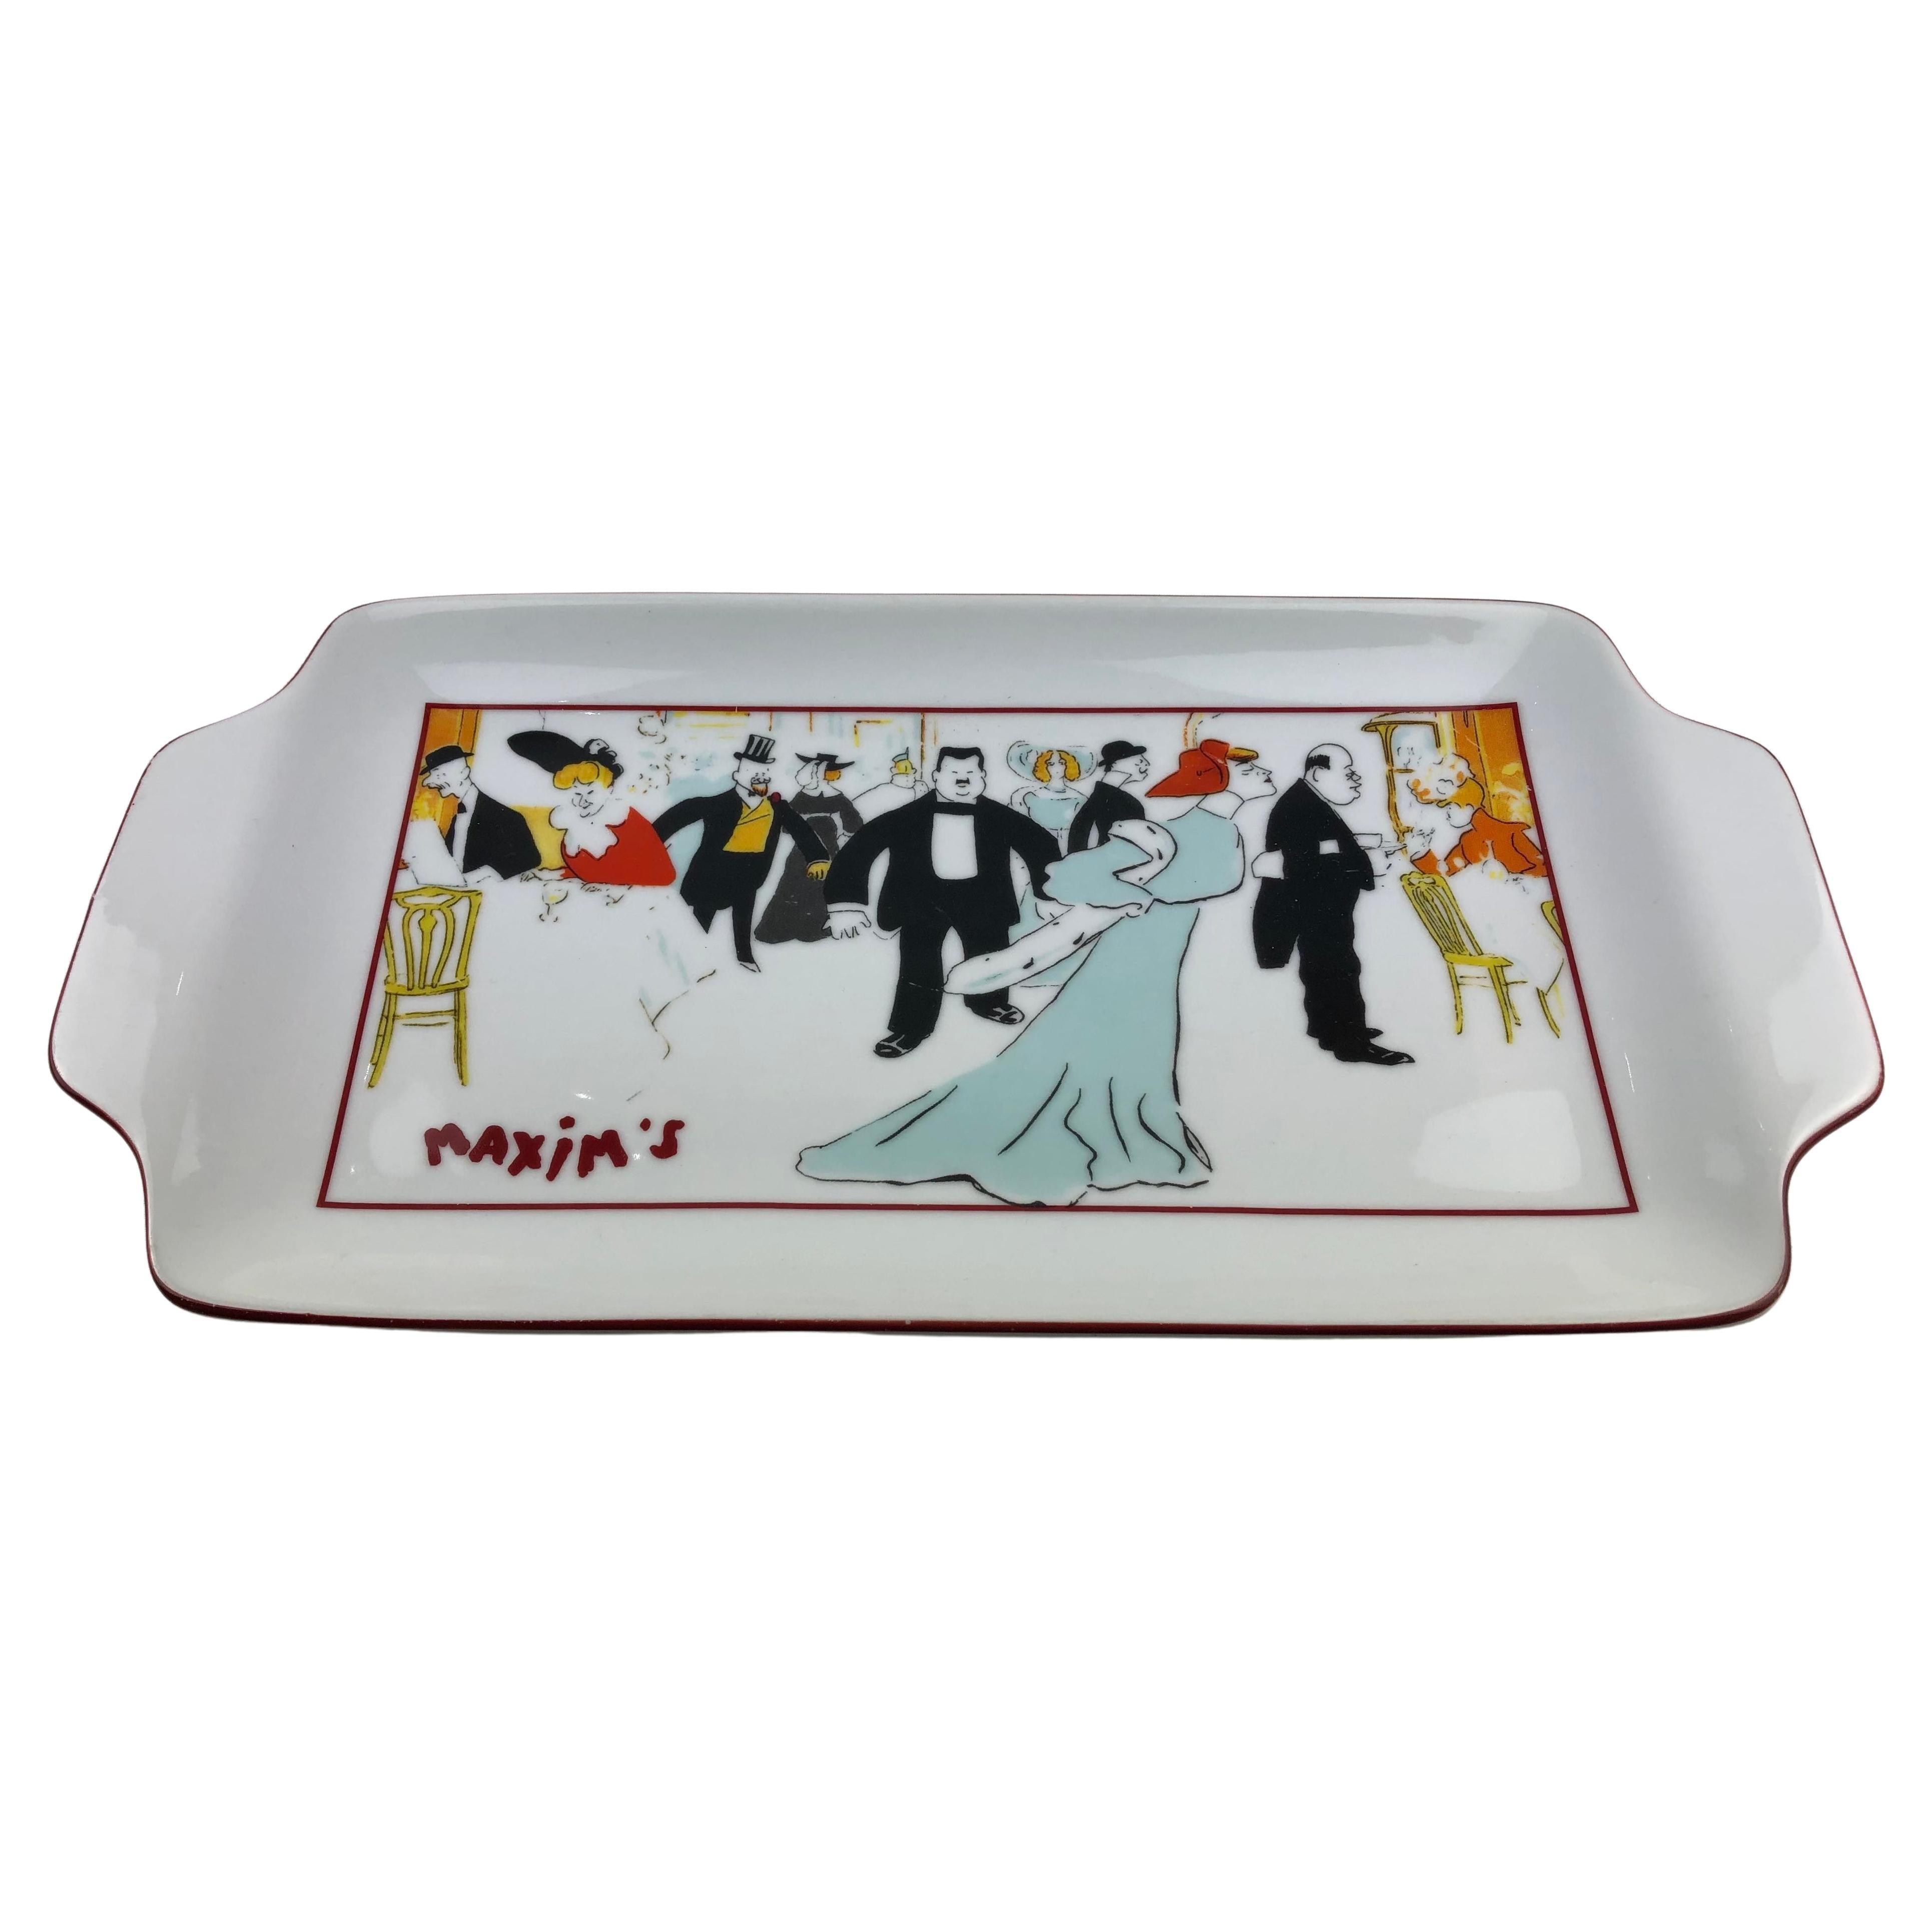 Vintage Glazed Porcelain Tray or Dish from Maxim's Paris France For Sale